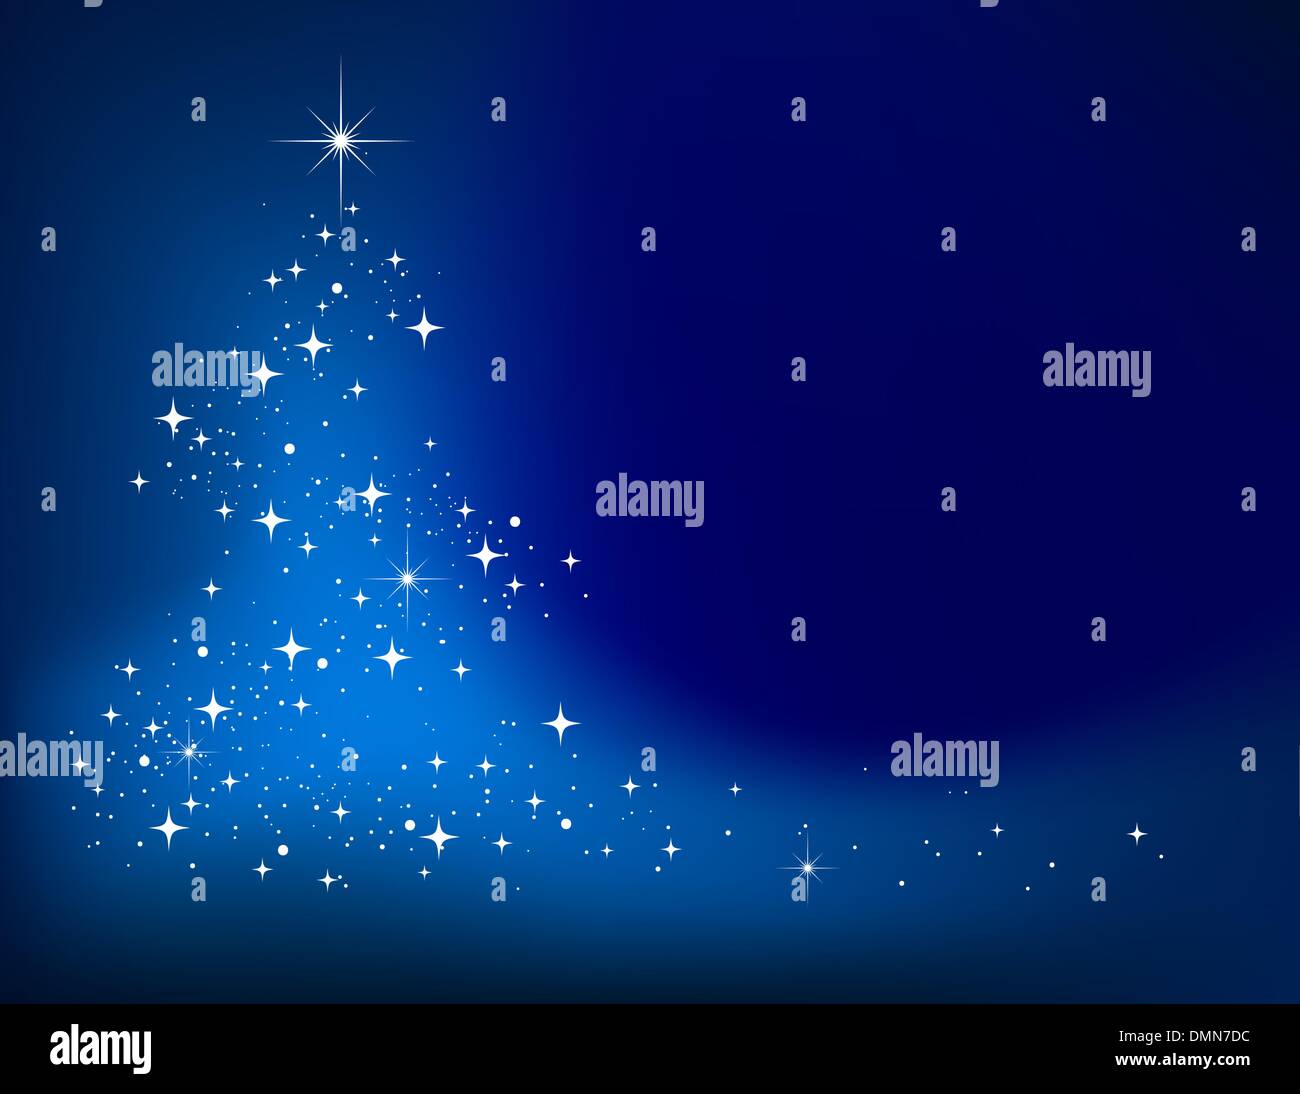 Blue vector abstract winter background with stars Christmas tree Stock Vector